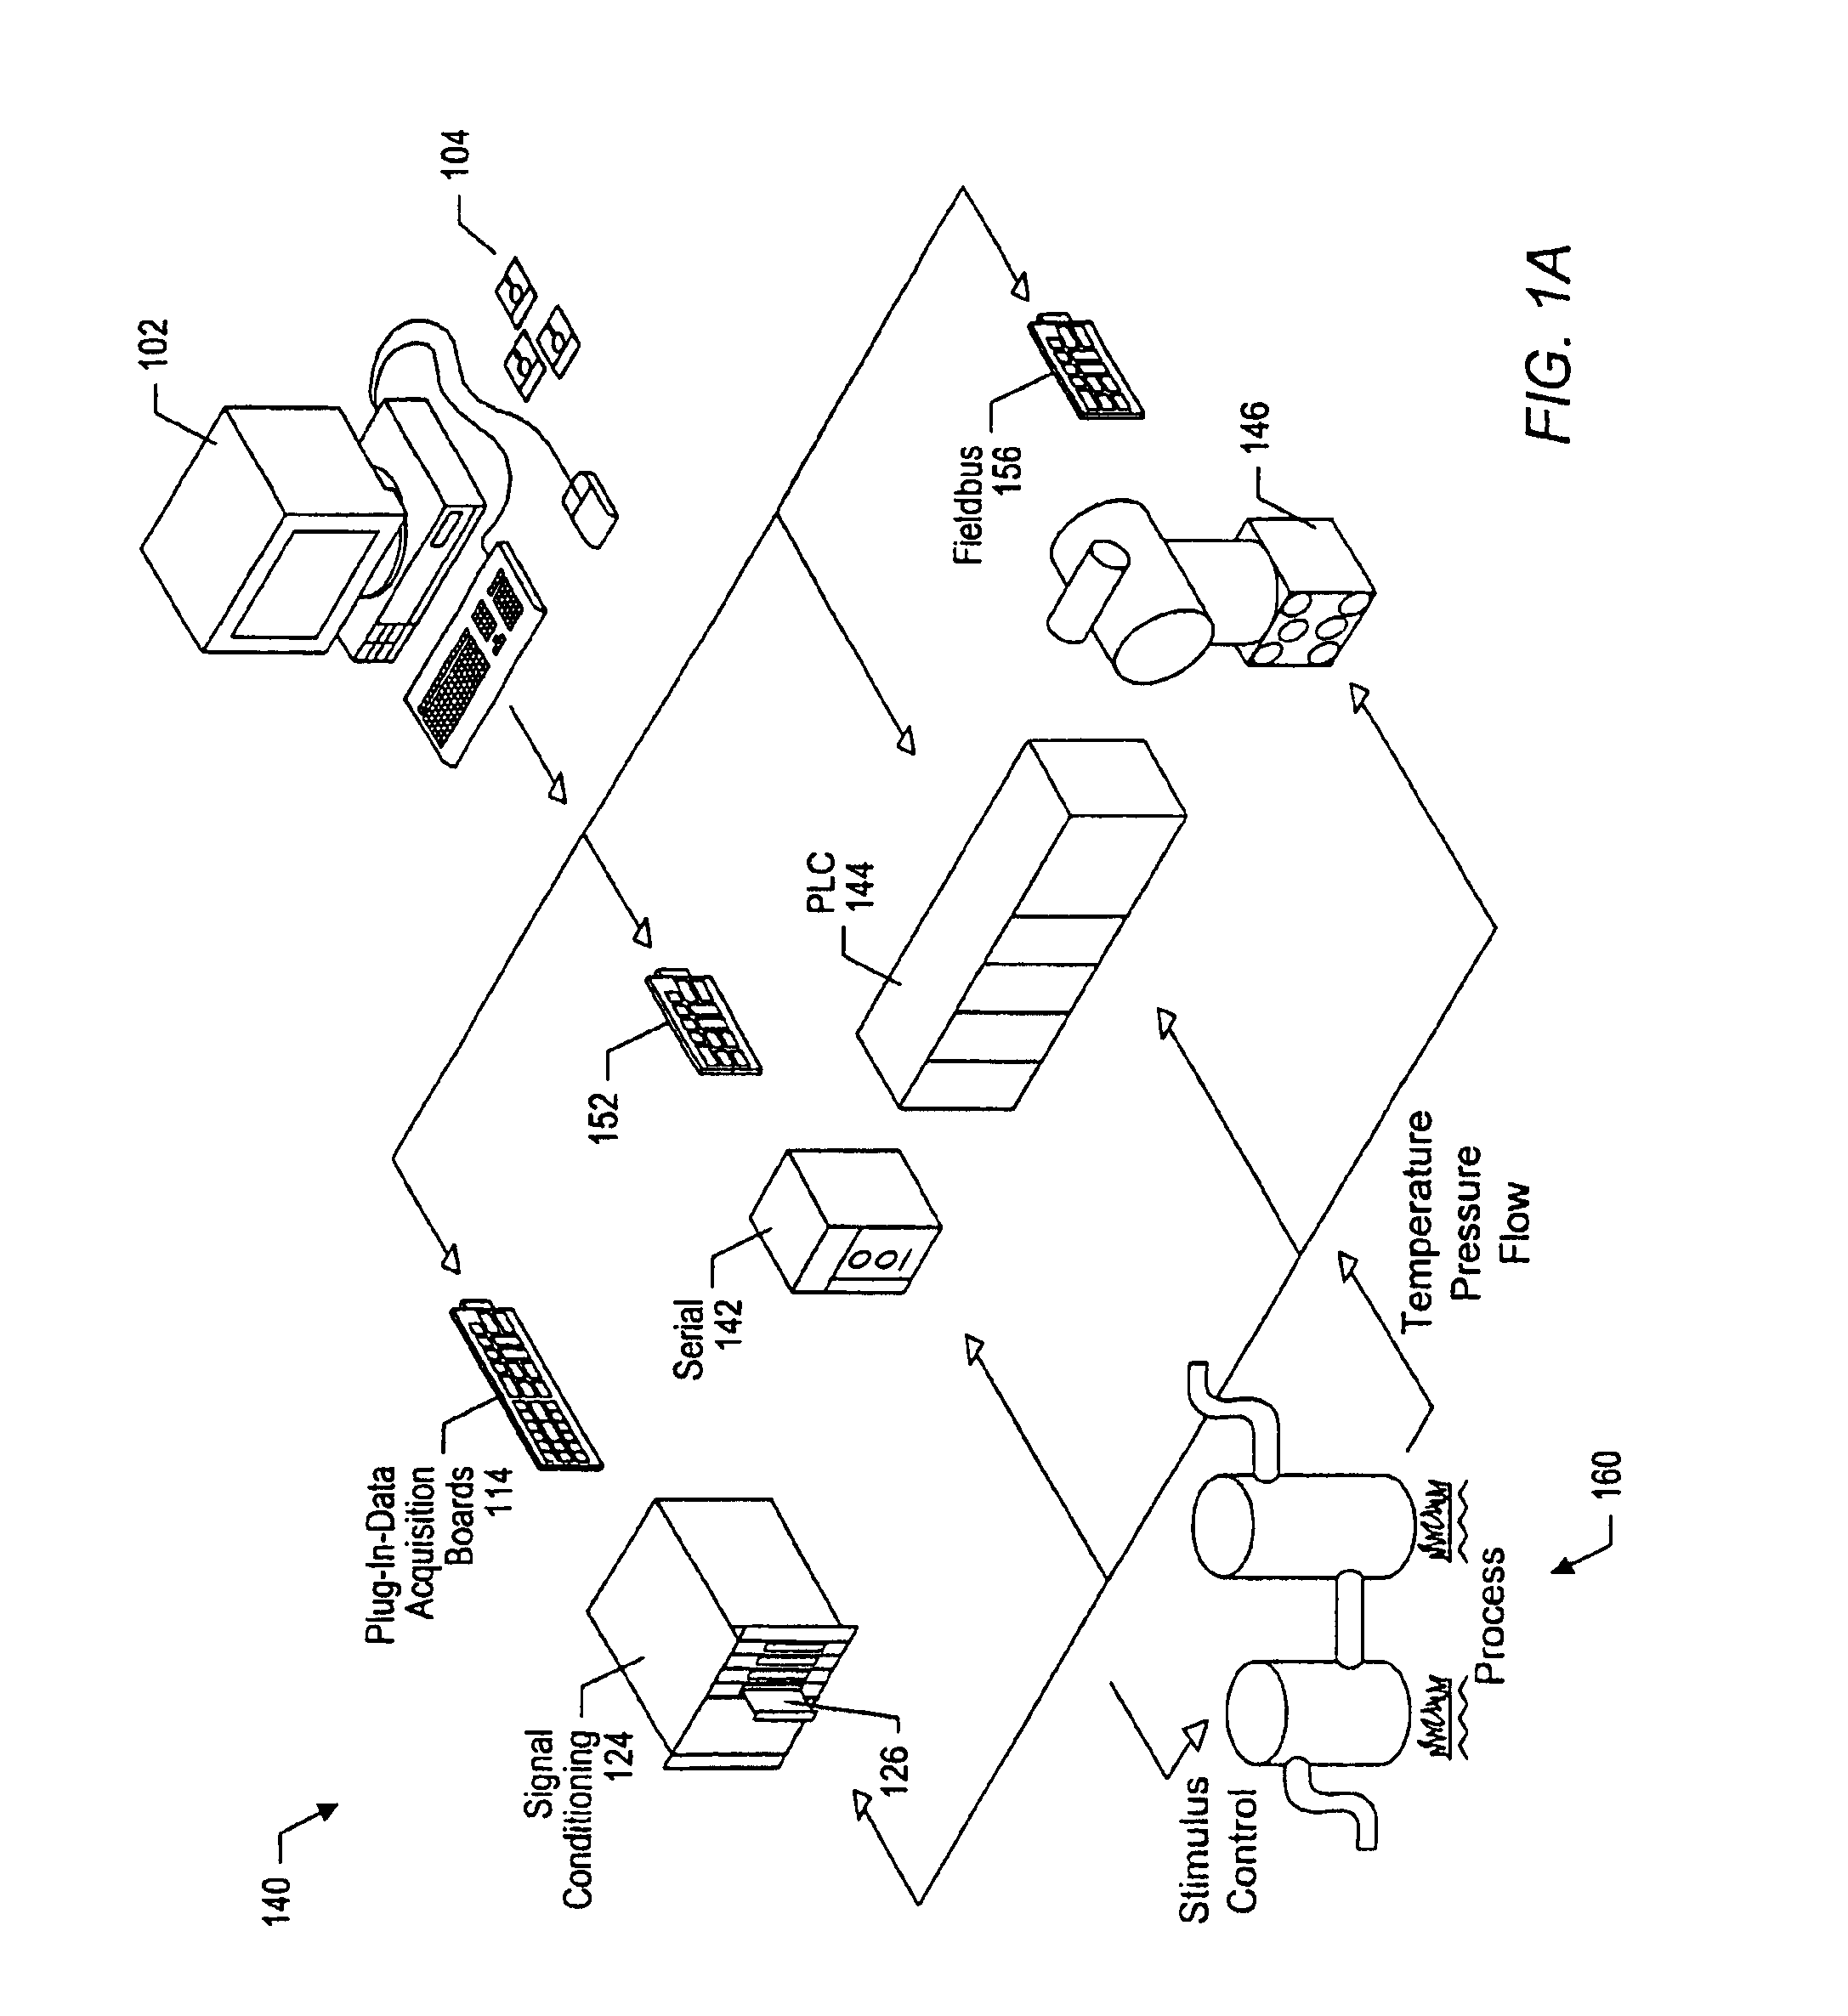 Graphical program with various function icons and method for conversion into hardware implementation